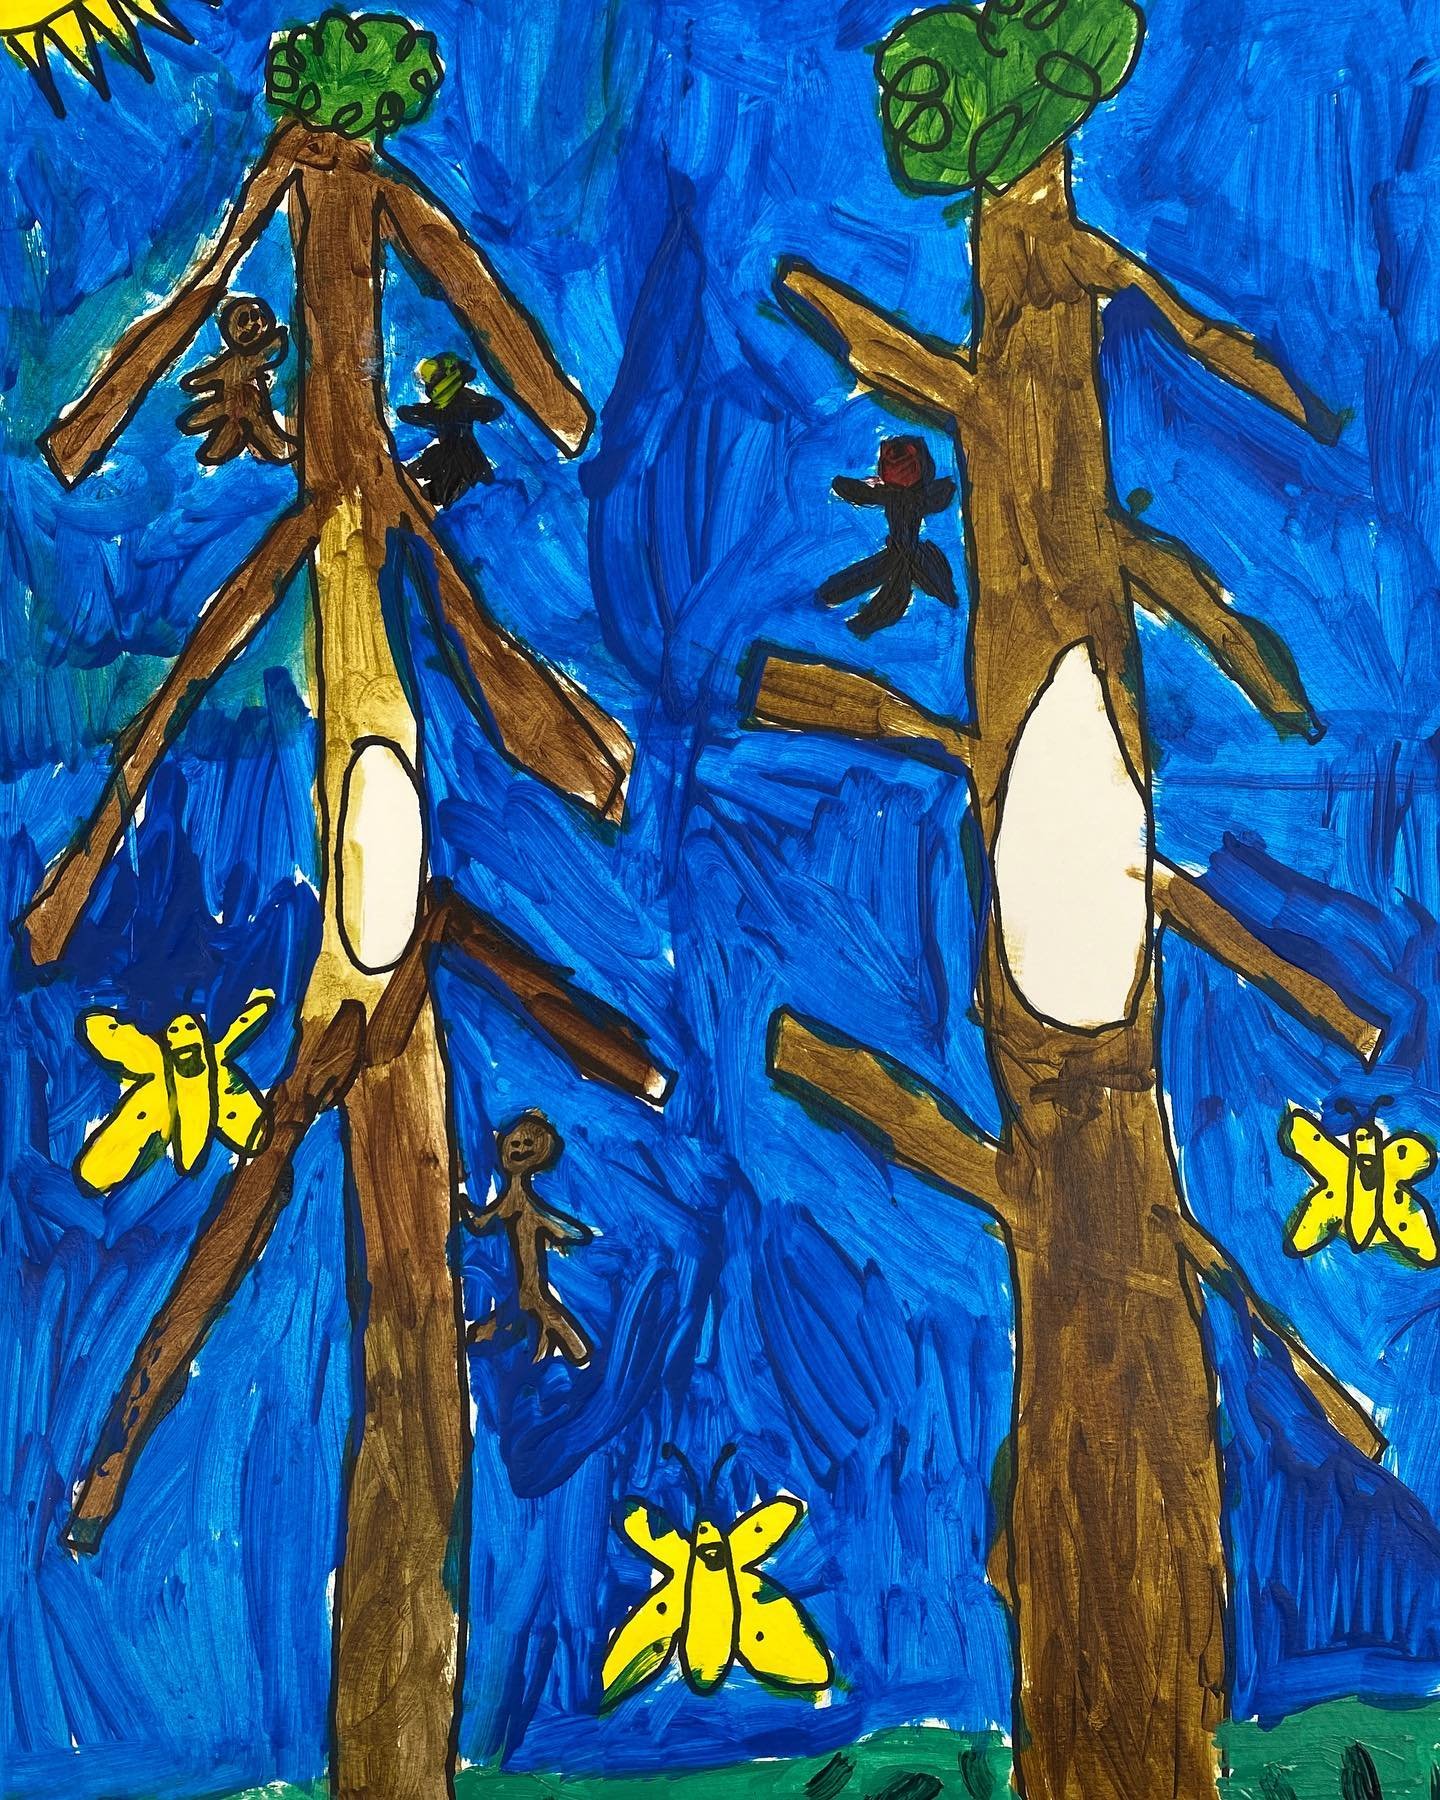 &ldquo;The Earth is&hellip; Life,&rdquo; painting by a second grader.